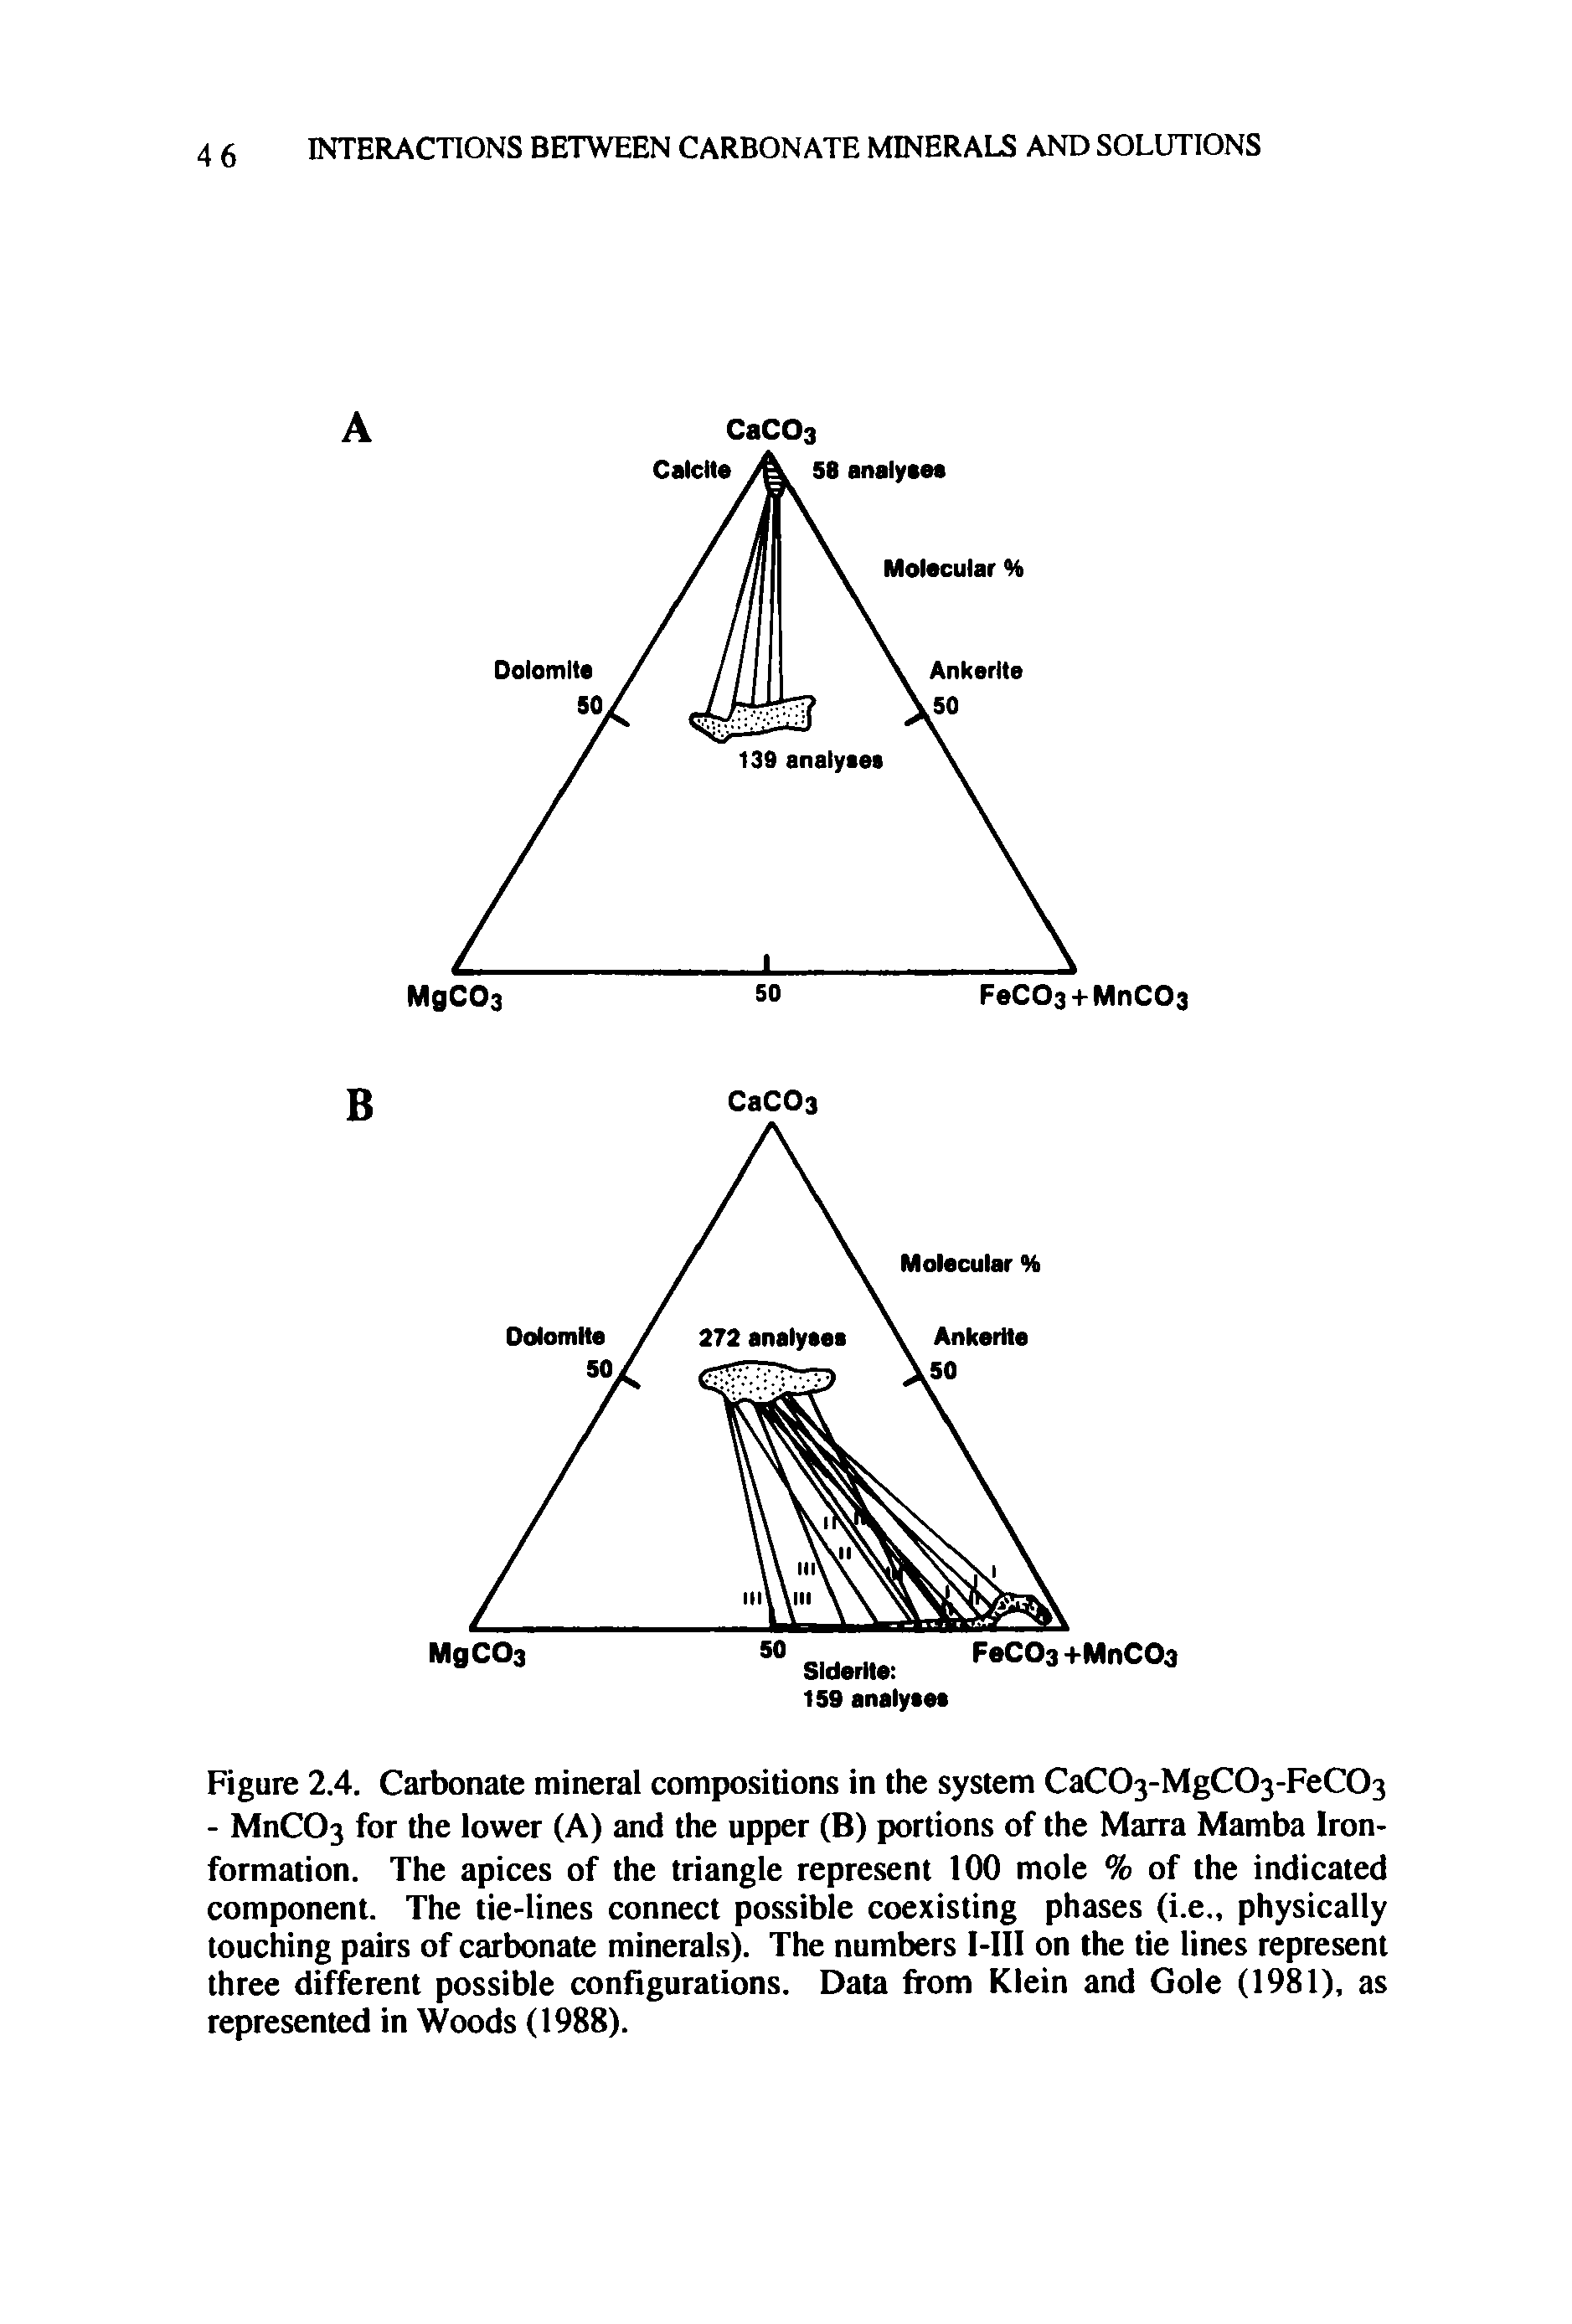 Figure 2.4. Carbonate mineral compositions in the system CaC03-MgC03-FeC03 - MnCC>3 for the lower (A) and the upper (B) portions of the Marra Mamba Iron-formation. The apices of the triangle represent 100 mole % of the indicated component. The tie-lines connect possible coexisting phases (i.e physically touching pairs of carbonate minerals). The numbers I-III on the tie lines represent three different possible configurations. Data from Klein and Gole (1981), as represented in Woods (1988).